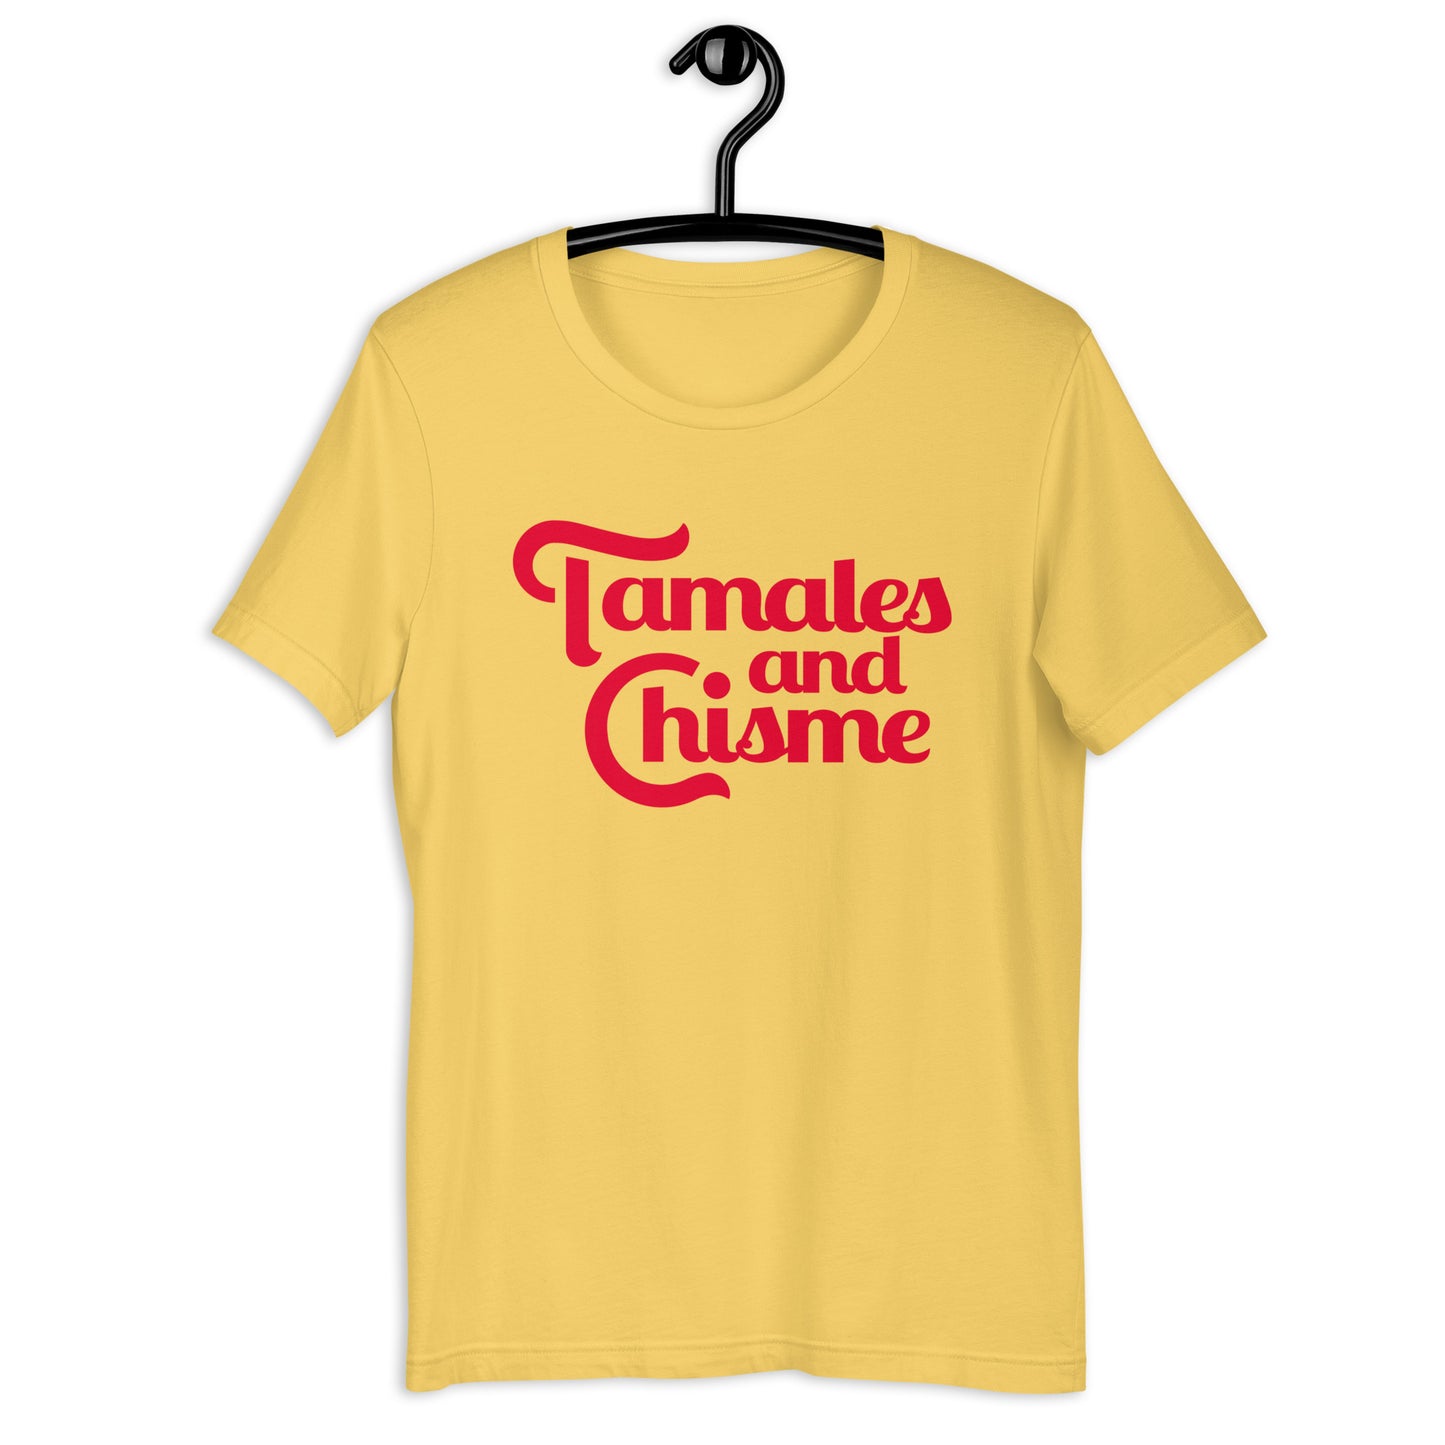 Tamales and Chisme Unisex T-Shirt (Bella + Canvas)